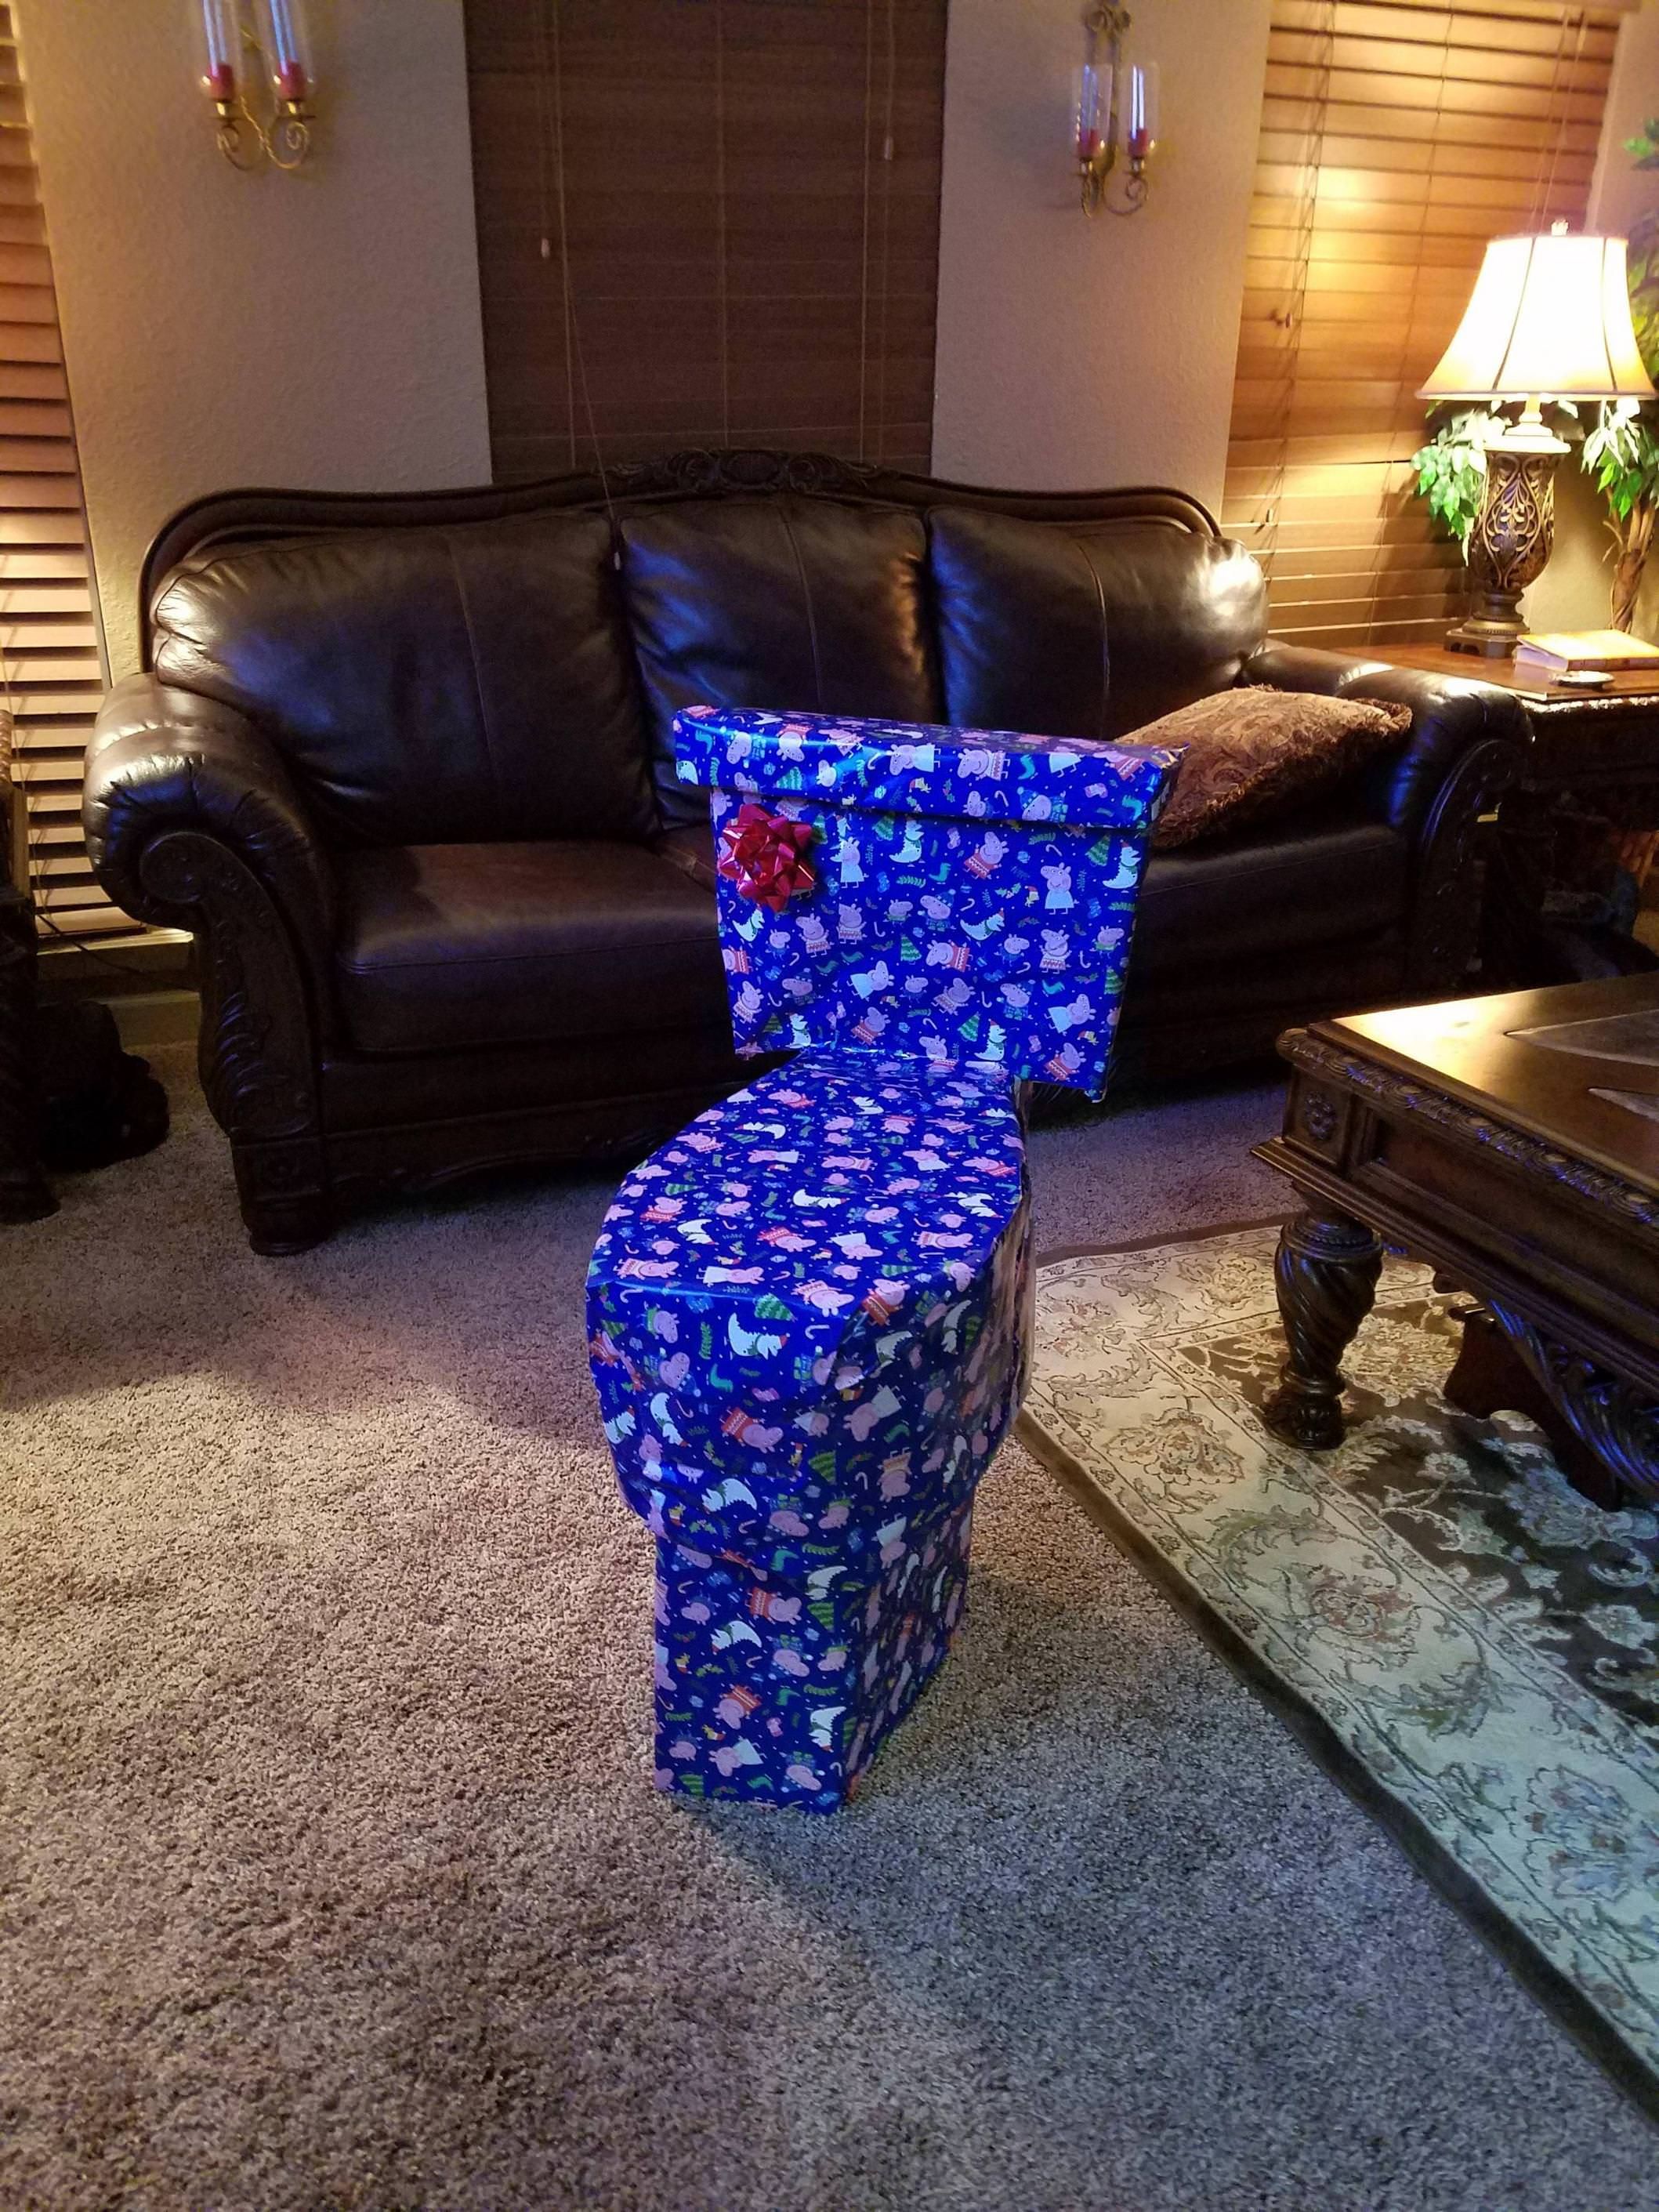 Every year I try to disguise my sister's Christmas present. This year I think I went a little too far...